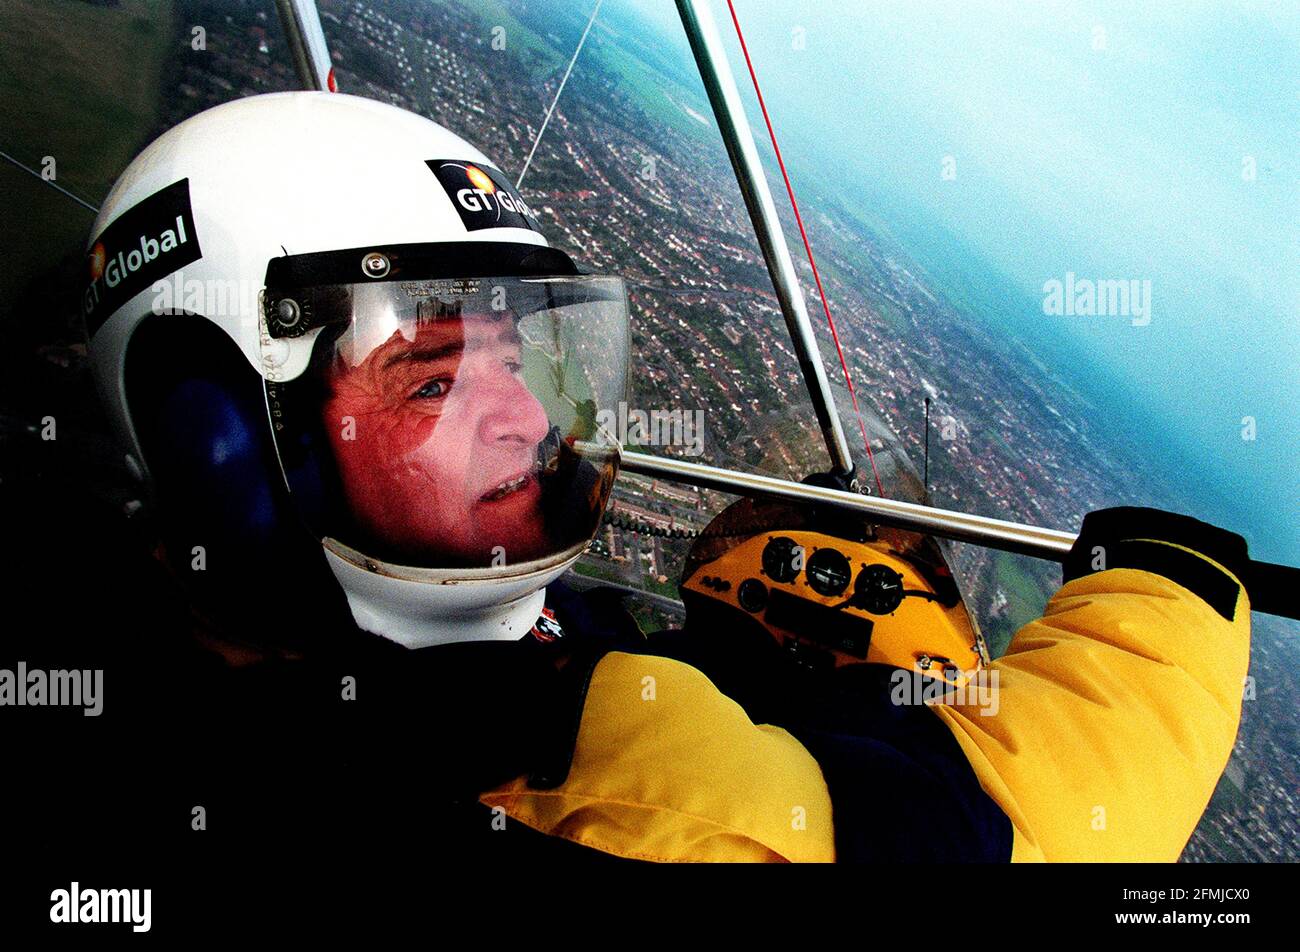 Brian Milton microlight pilot February 1998 Brian Milton 55 at the helm of his single engined micro light gt global flyer-, which he and co pilot keith reynolds will attempt to be the first microlight to circumnavigate the globe they will overfly 25 countries  24301 miles around the world in 80 consecutive  days on the 125th anniversery of the publication of jules verne's 'around the world in eighty days Stock Photo